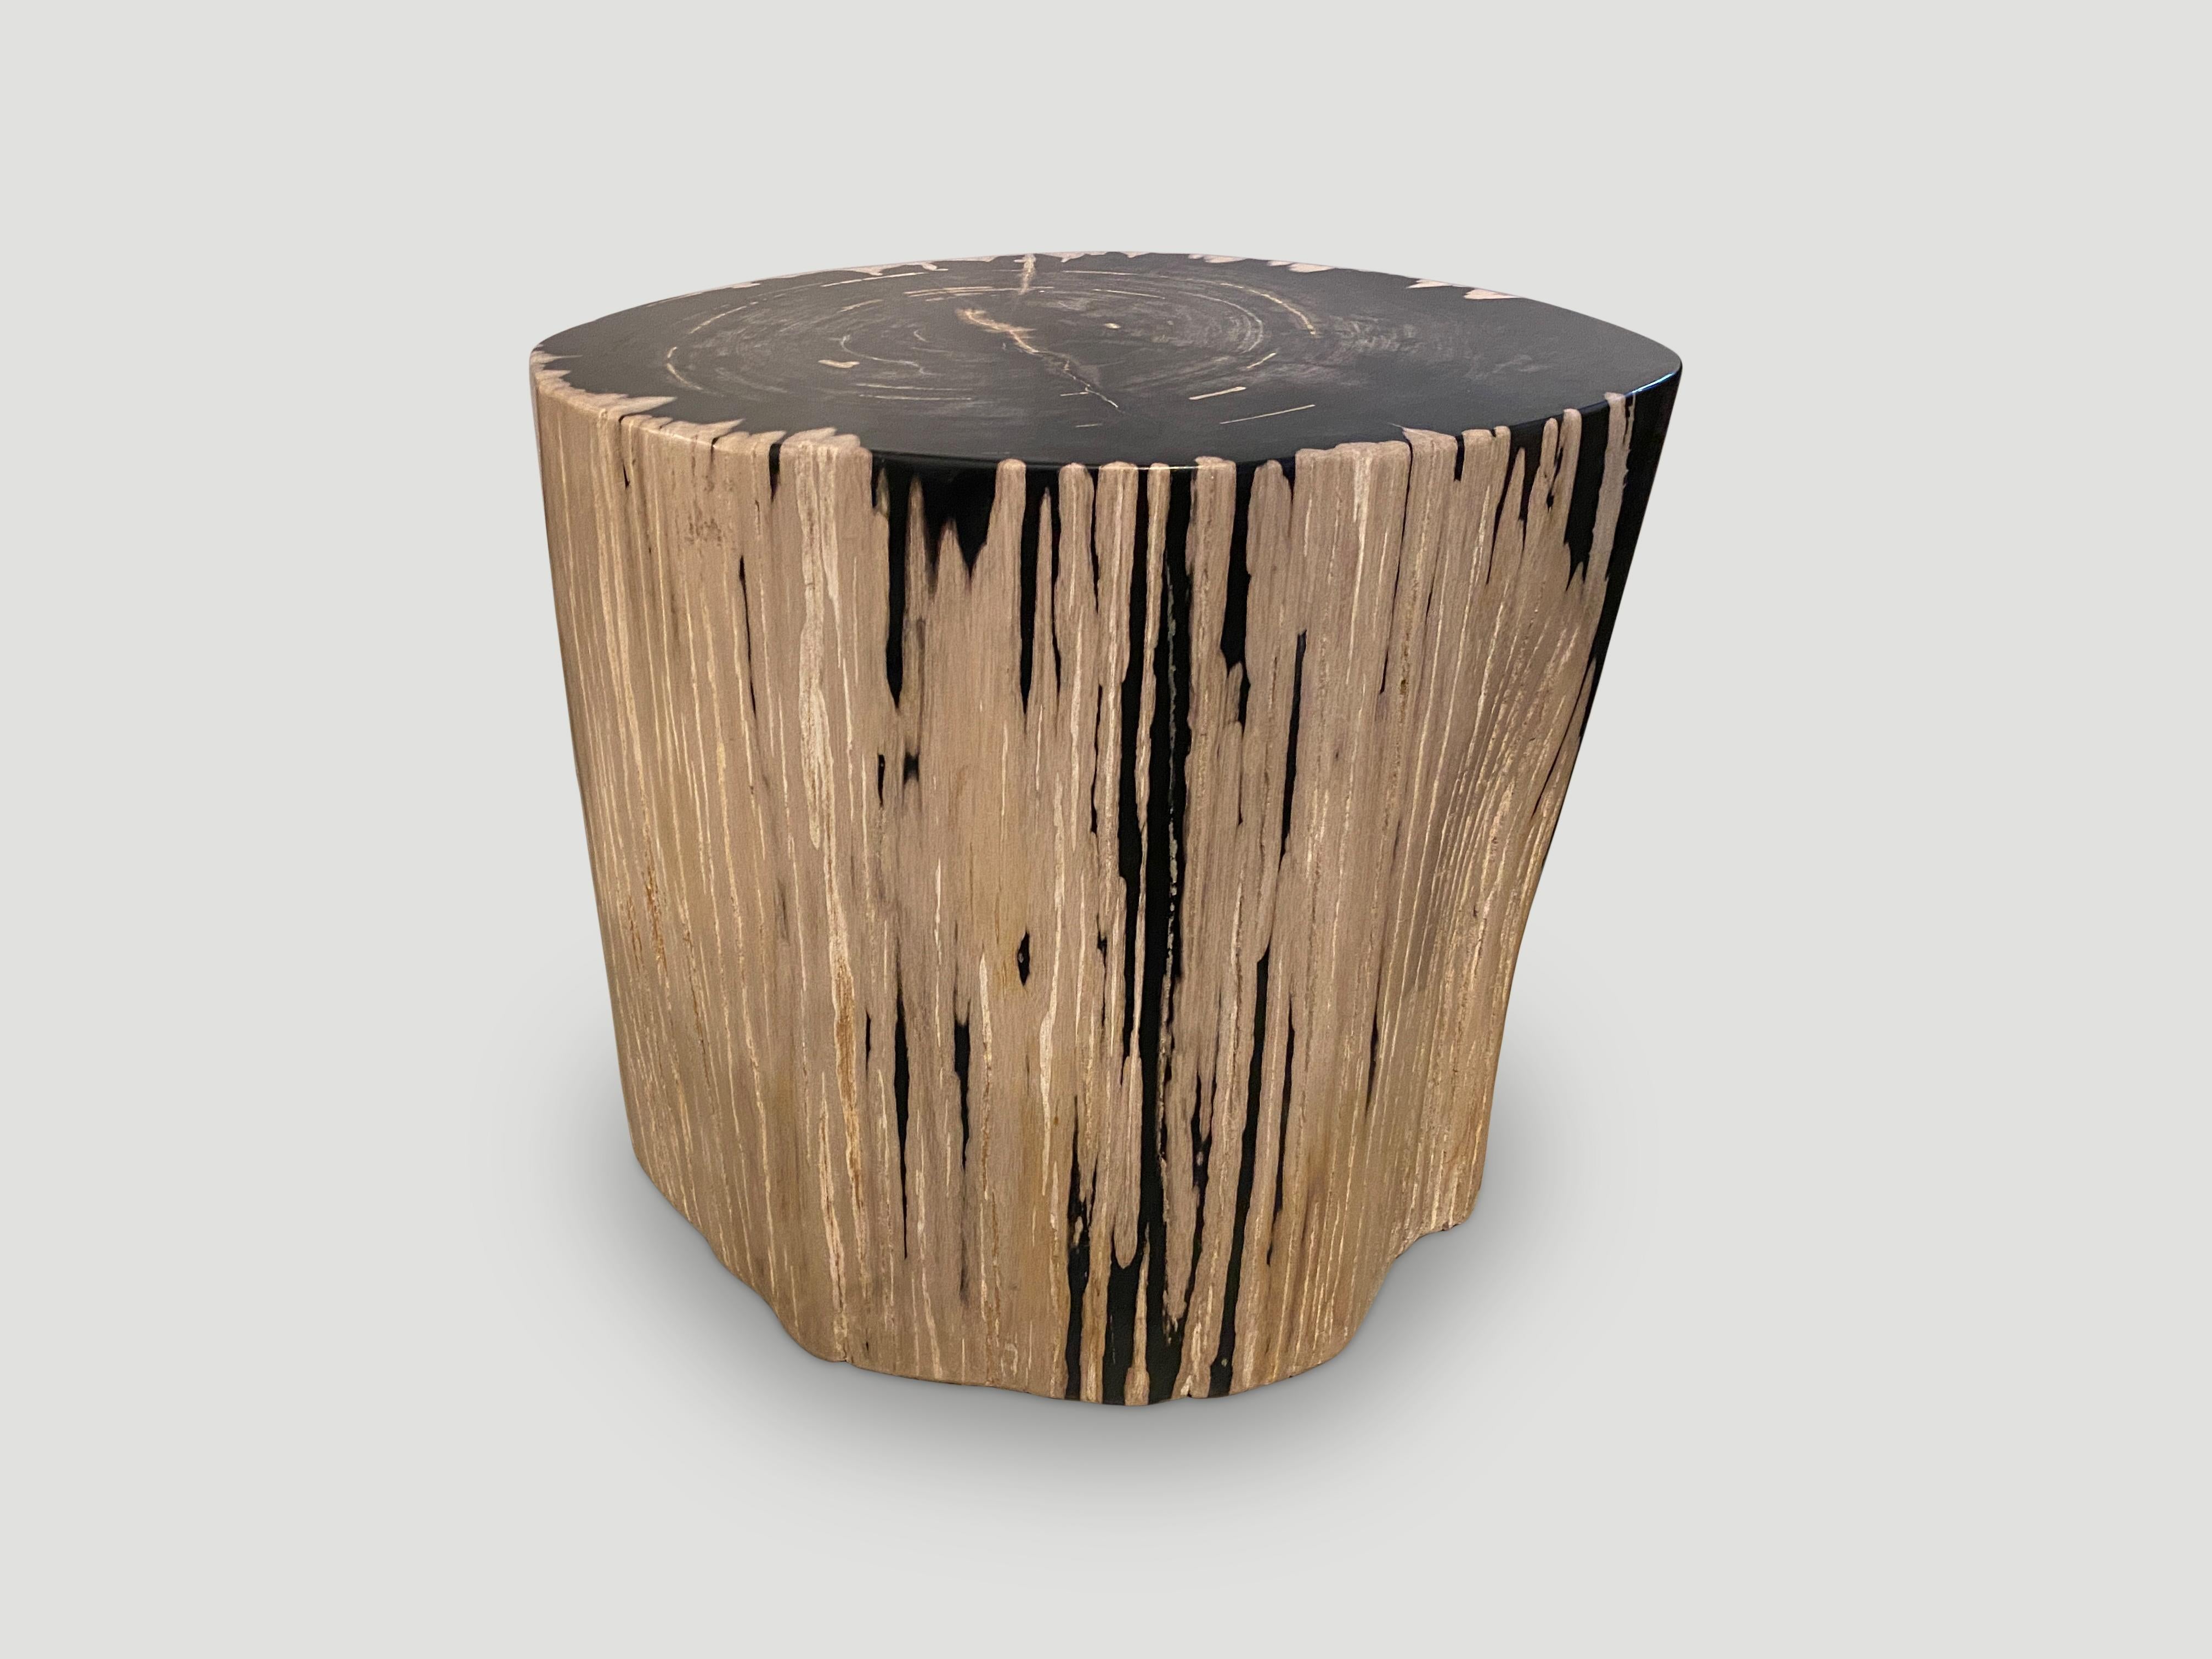 Impressive beautiful contrasting markings on this high quality super smooth, petrified wood side table. It’s fascinating how Mother Nature produces these stunning 40 million year old petrified teak logs with such contrasting colors and natural